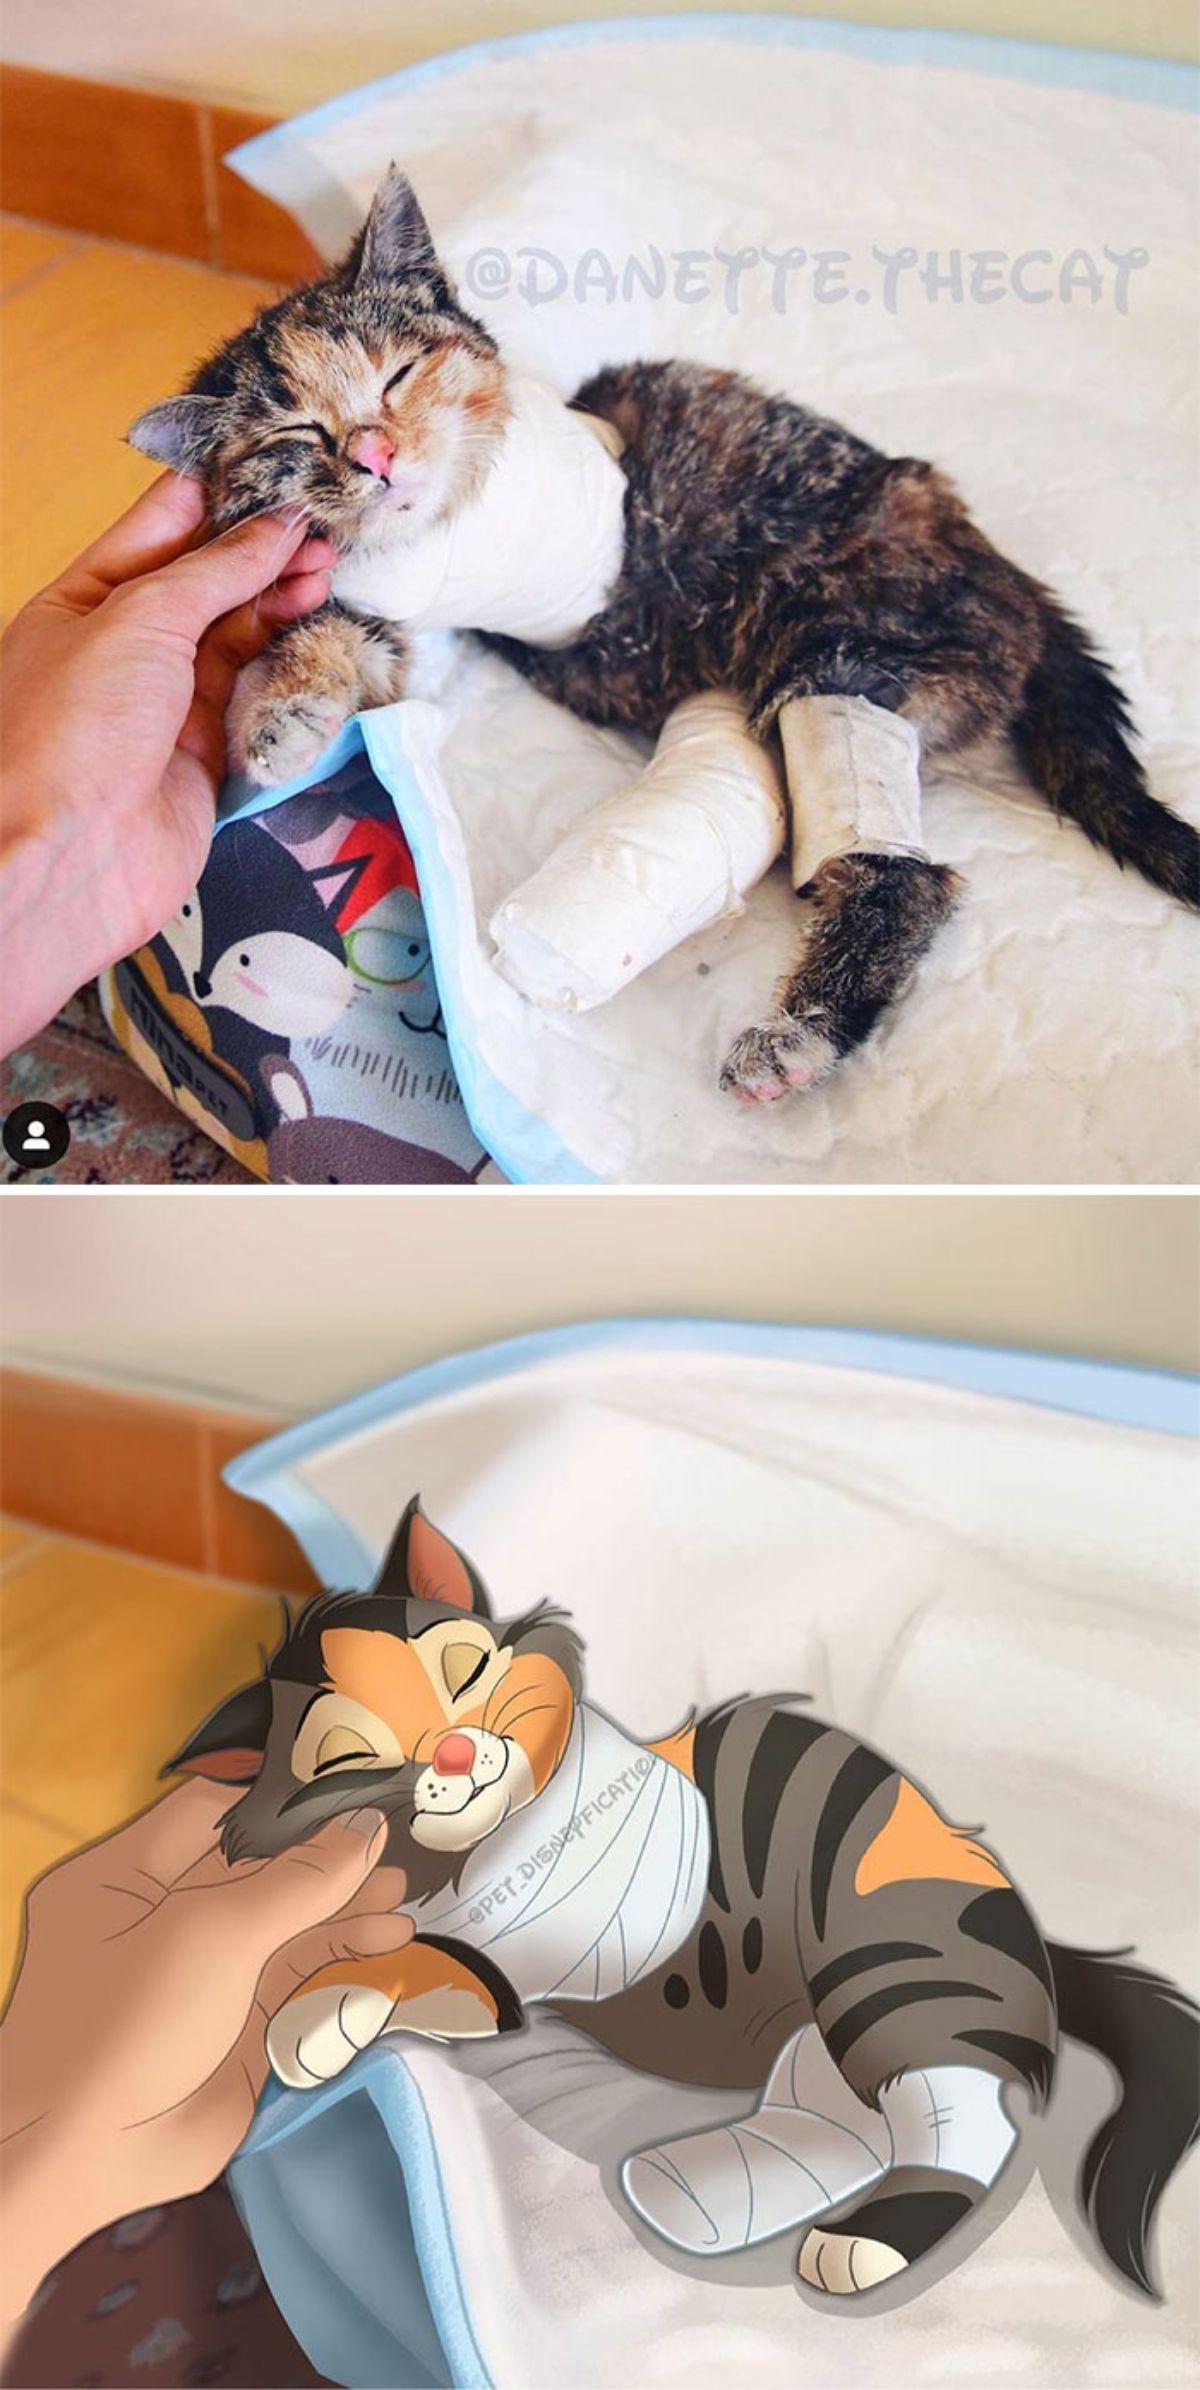 real photo and cartoon image of a black orange and white cat with bandages around the neck and two of the legs